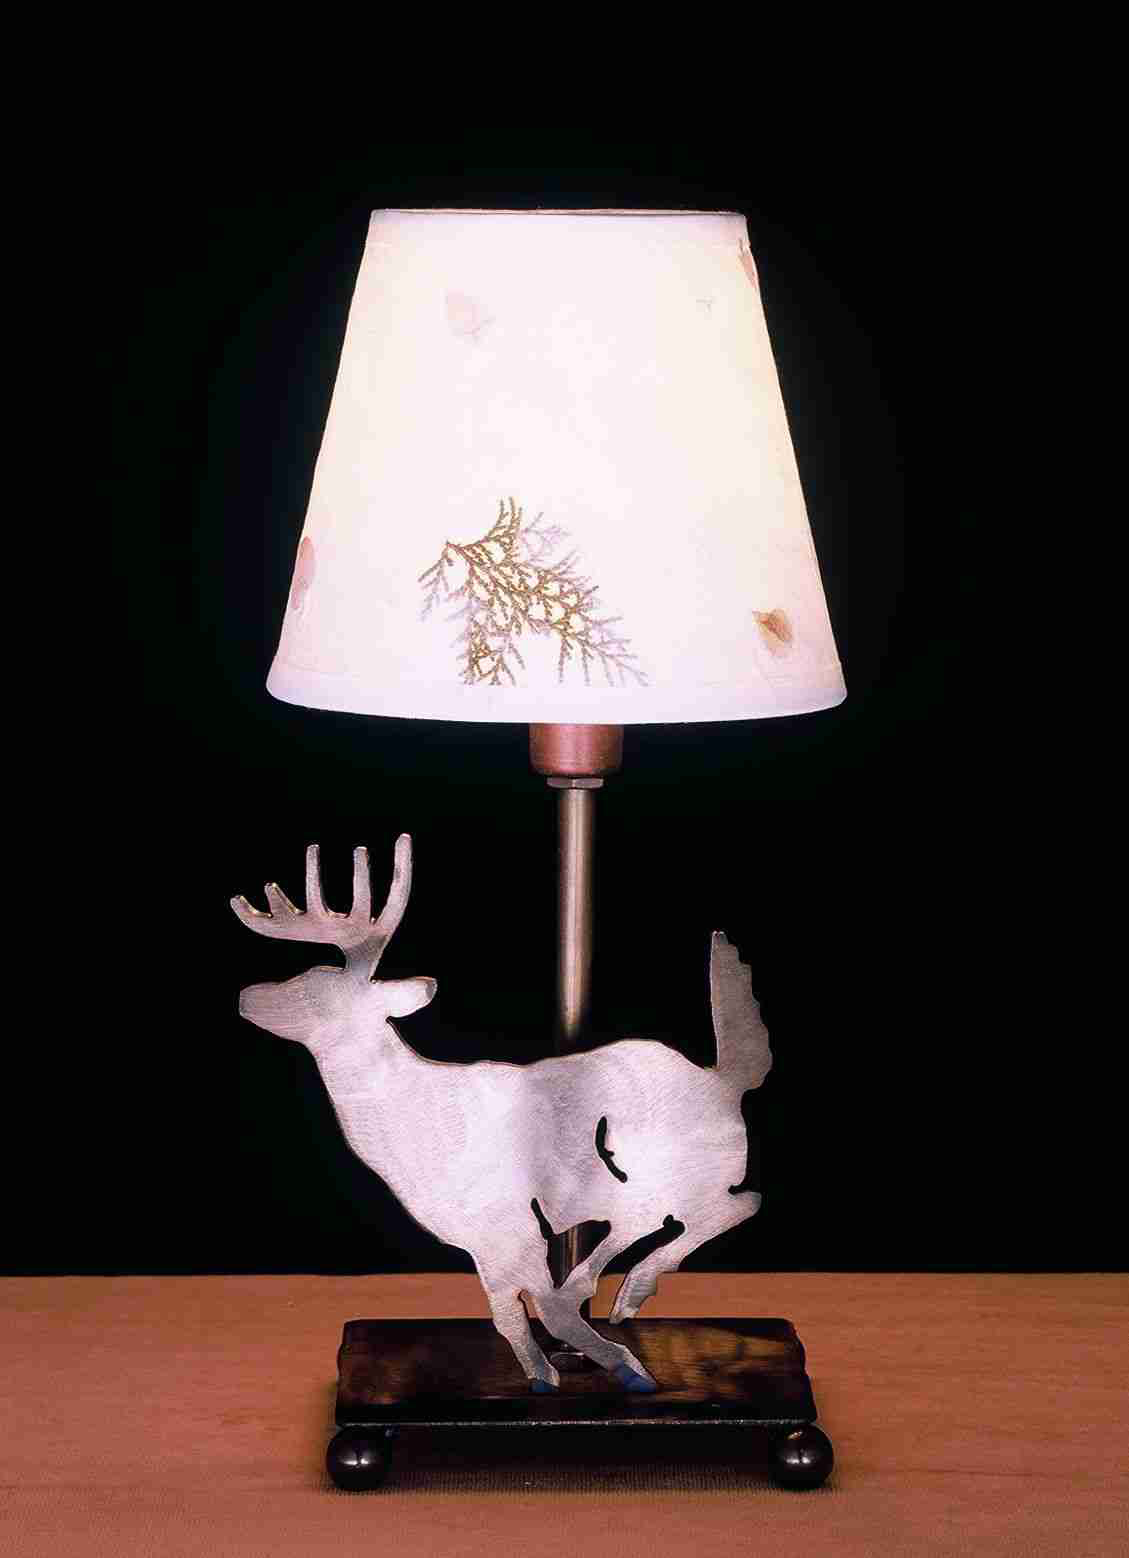 13"H Lone Deer Parchment Shade Accent Lamp